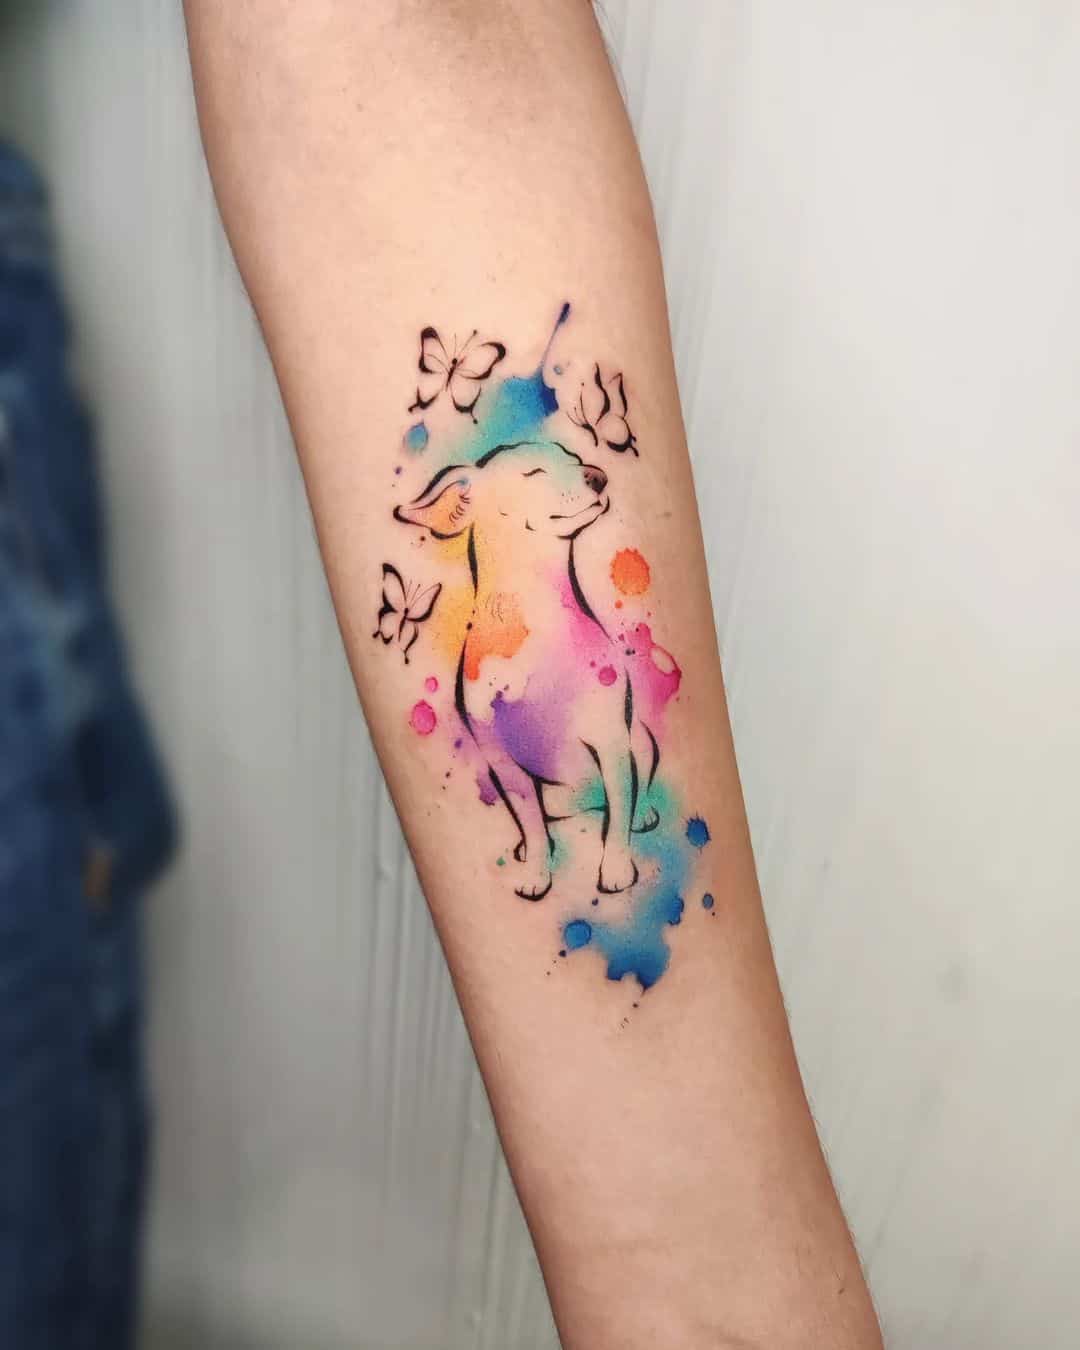 Watercolor tattoo by true.colors.tattoos